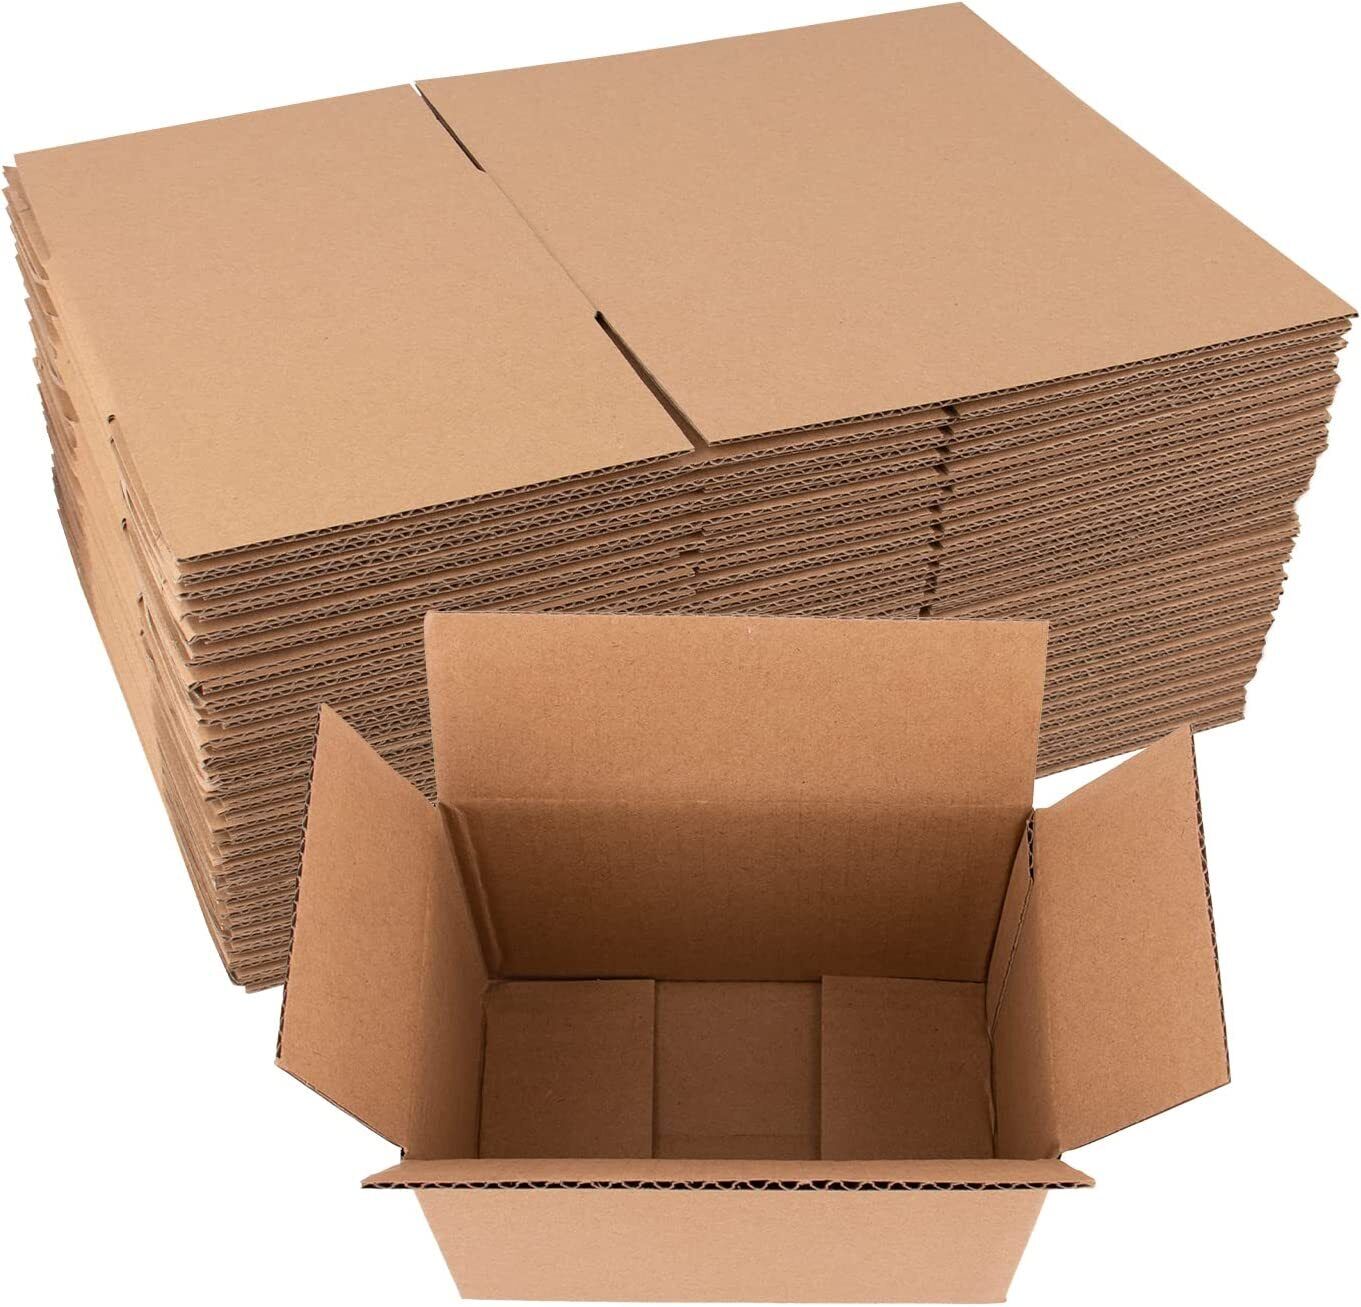 6x4x4 Shipping Packing Mailing Moving Boxes Corrugated Carton 100 % Best